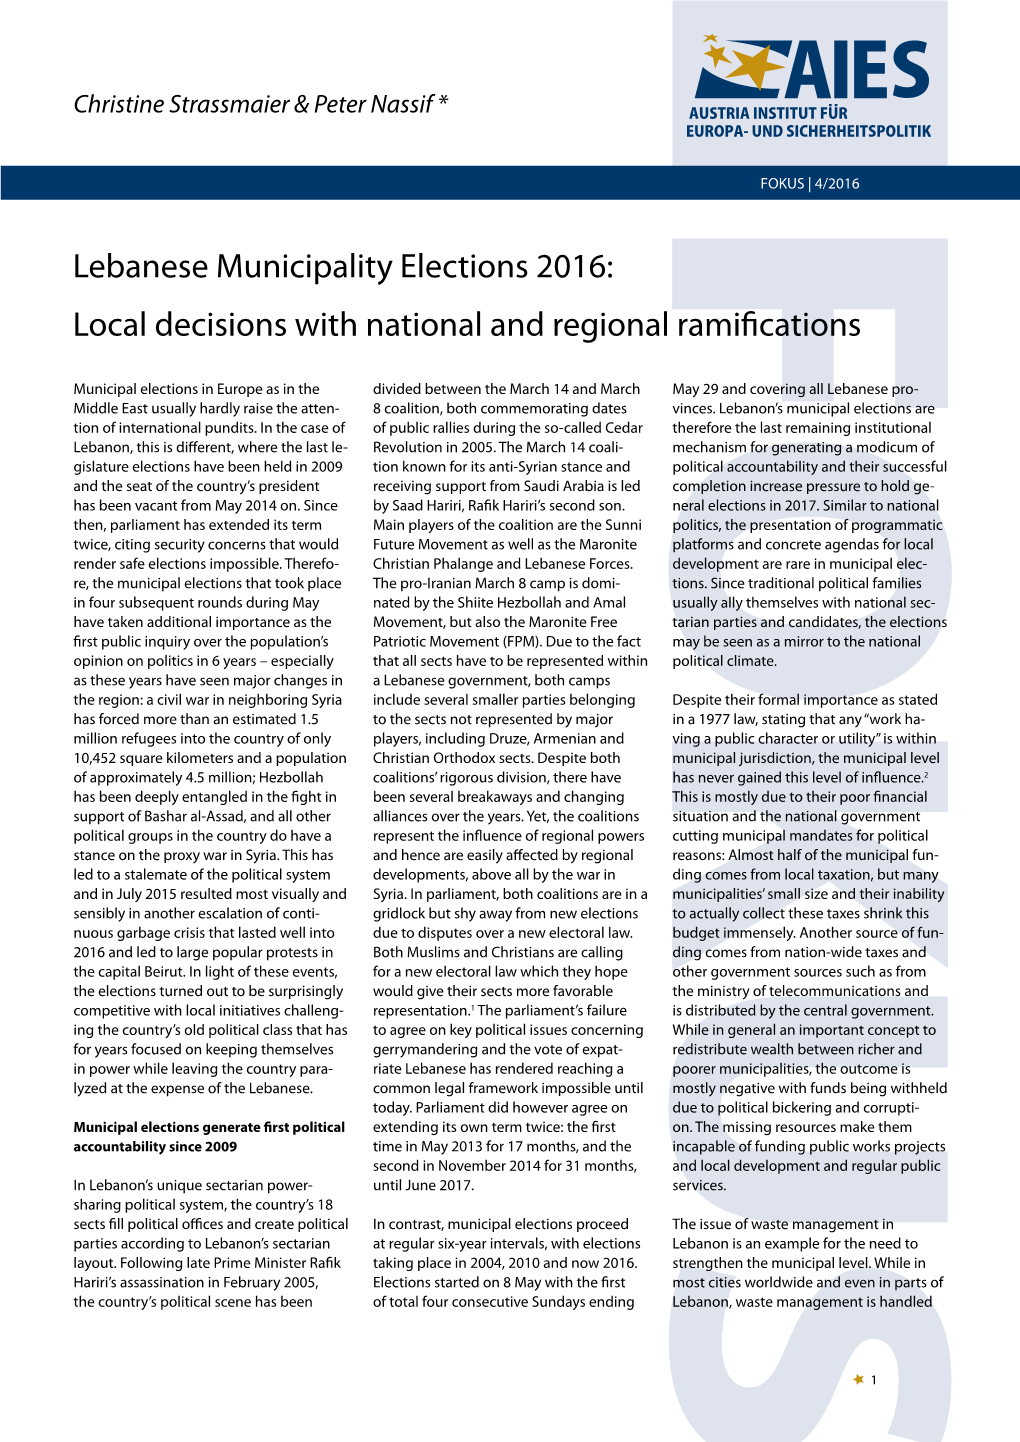 Lebanese Municipality Elections 2016: Local Decisions with National and Regional Ramifications